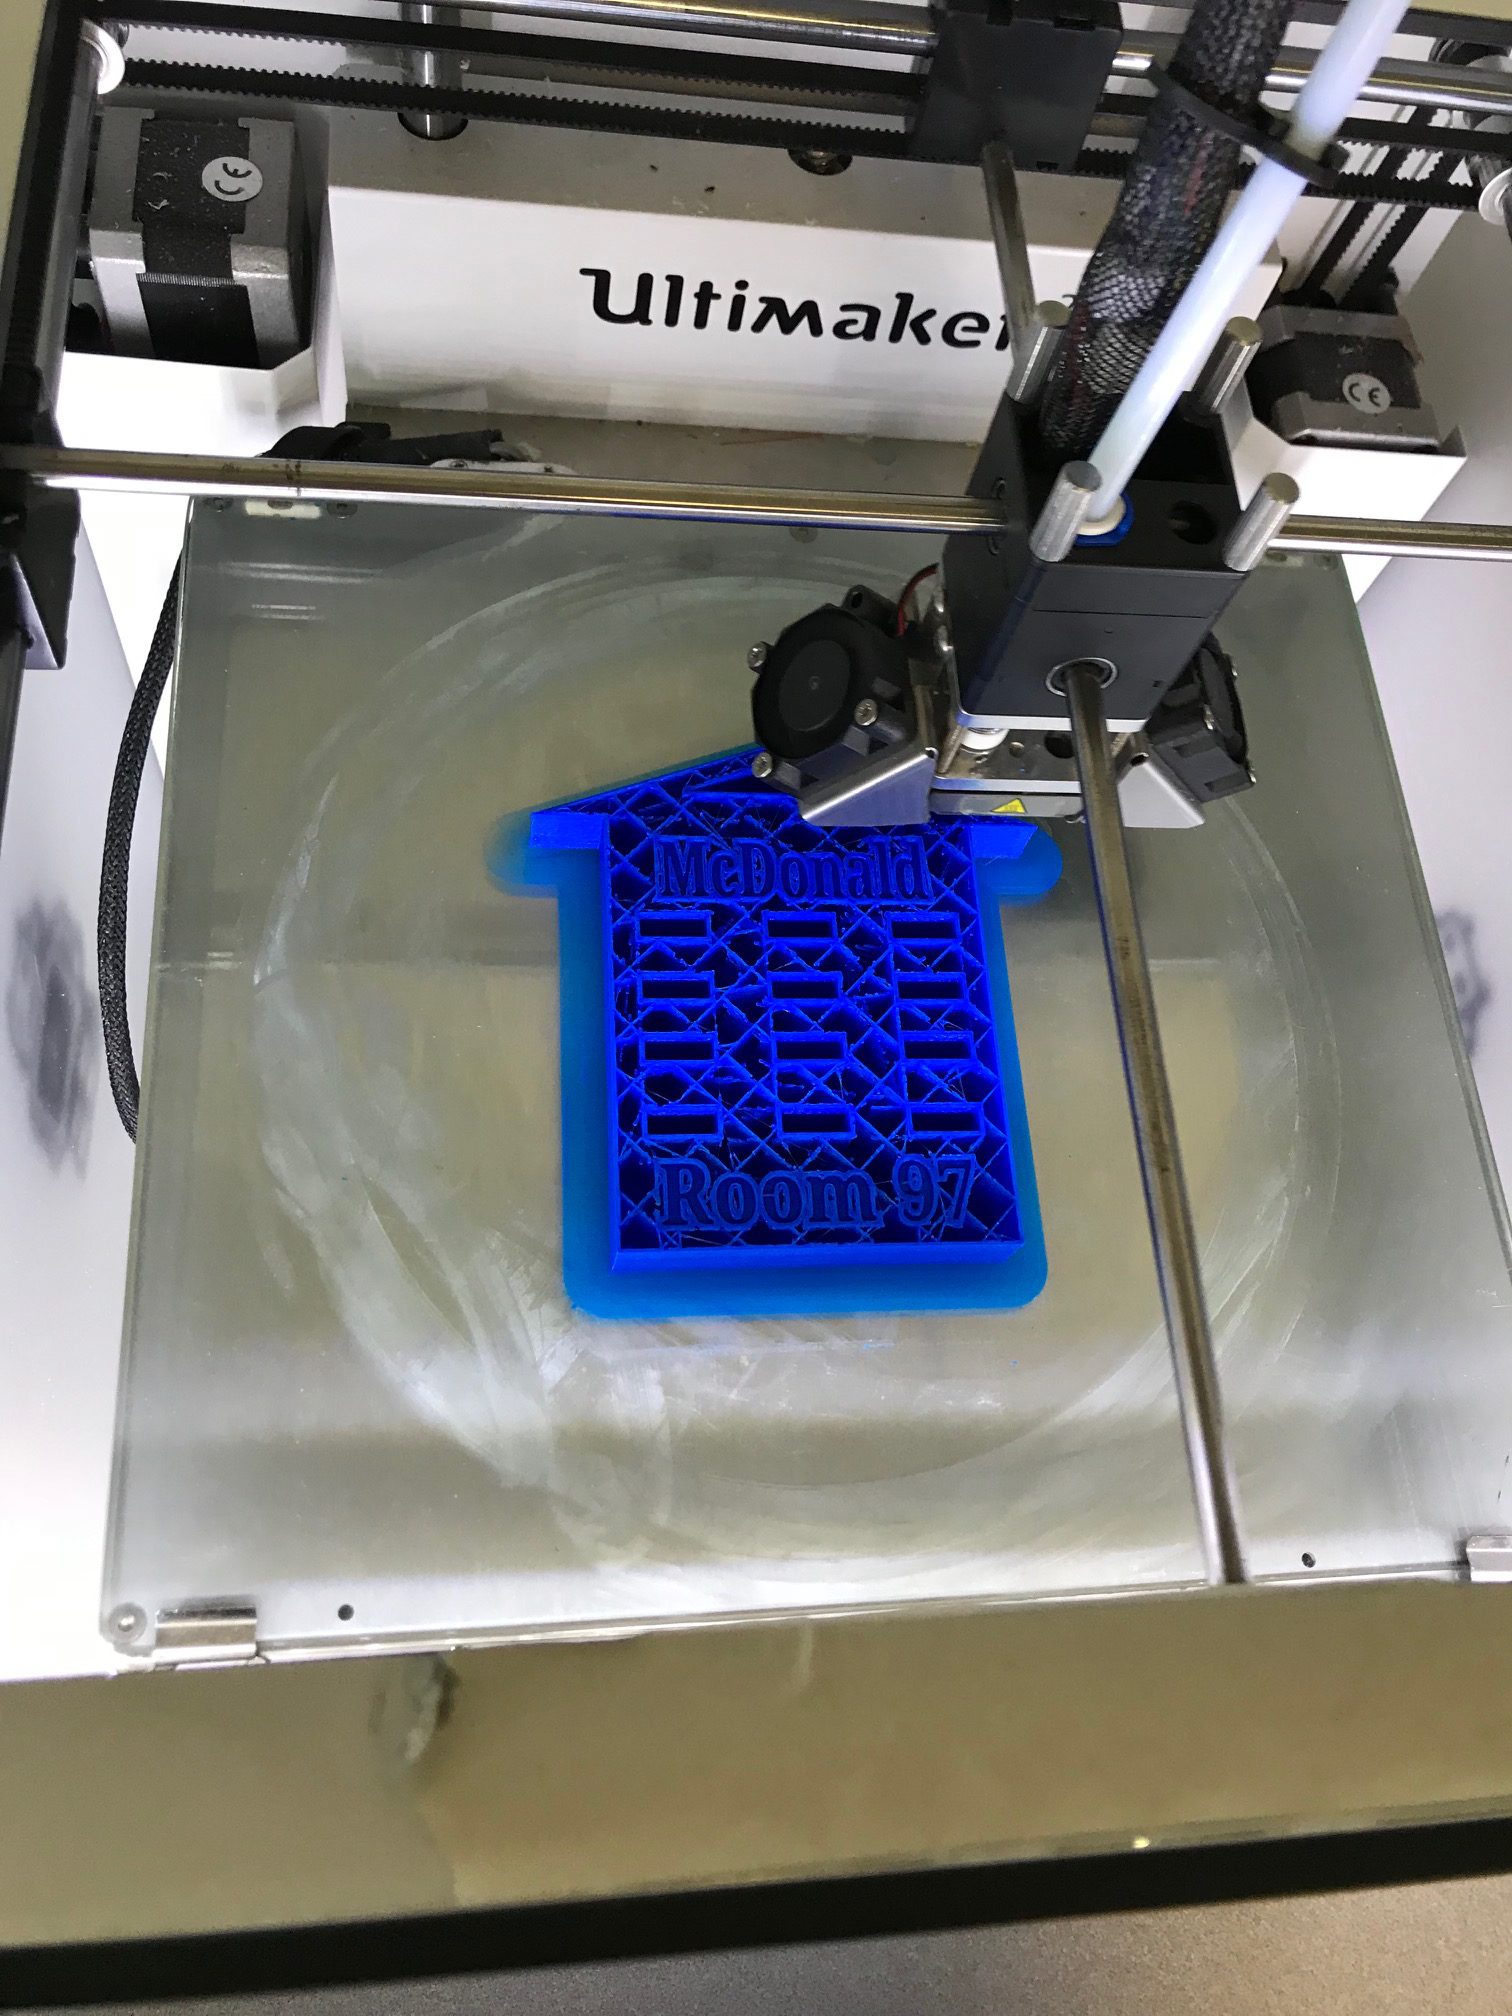 Tales from the Classroom: 3D Printing in Physics